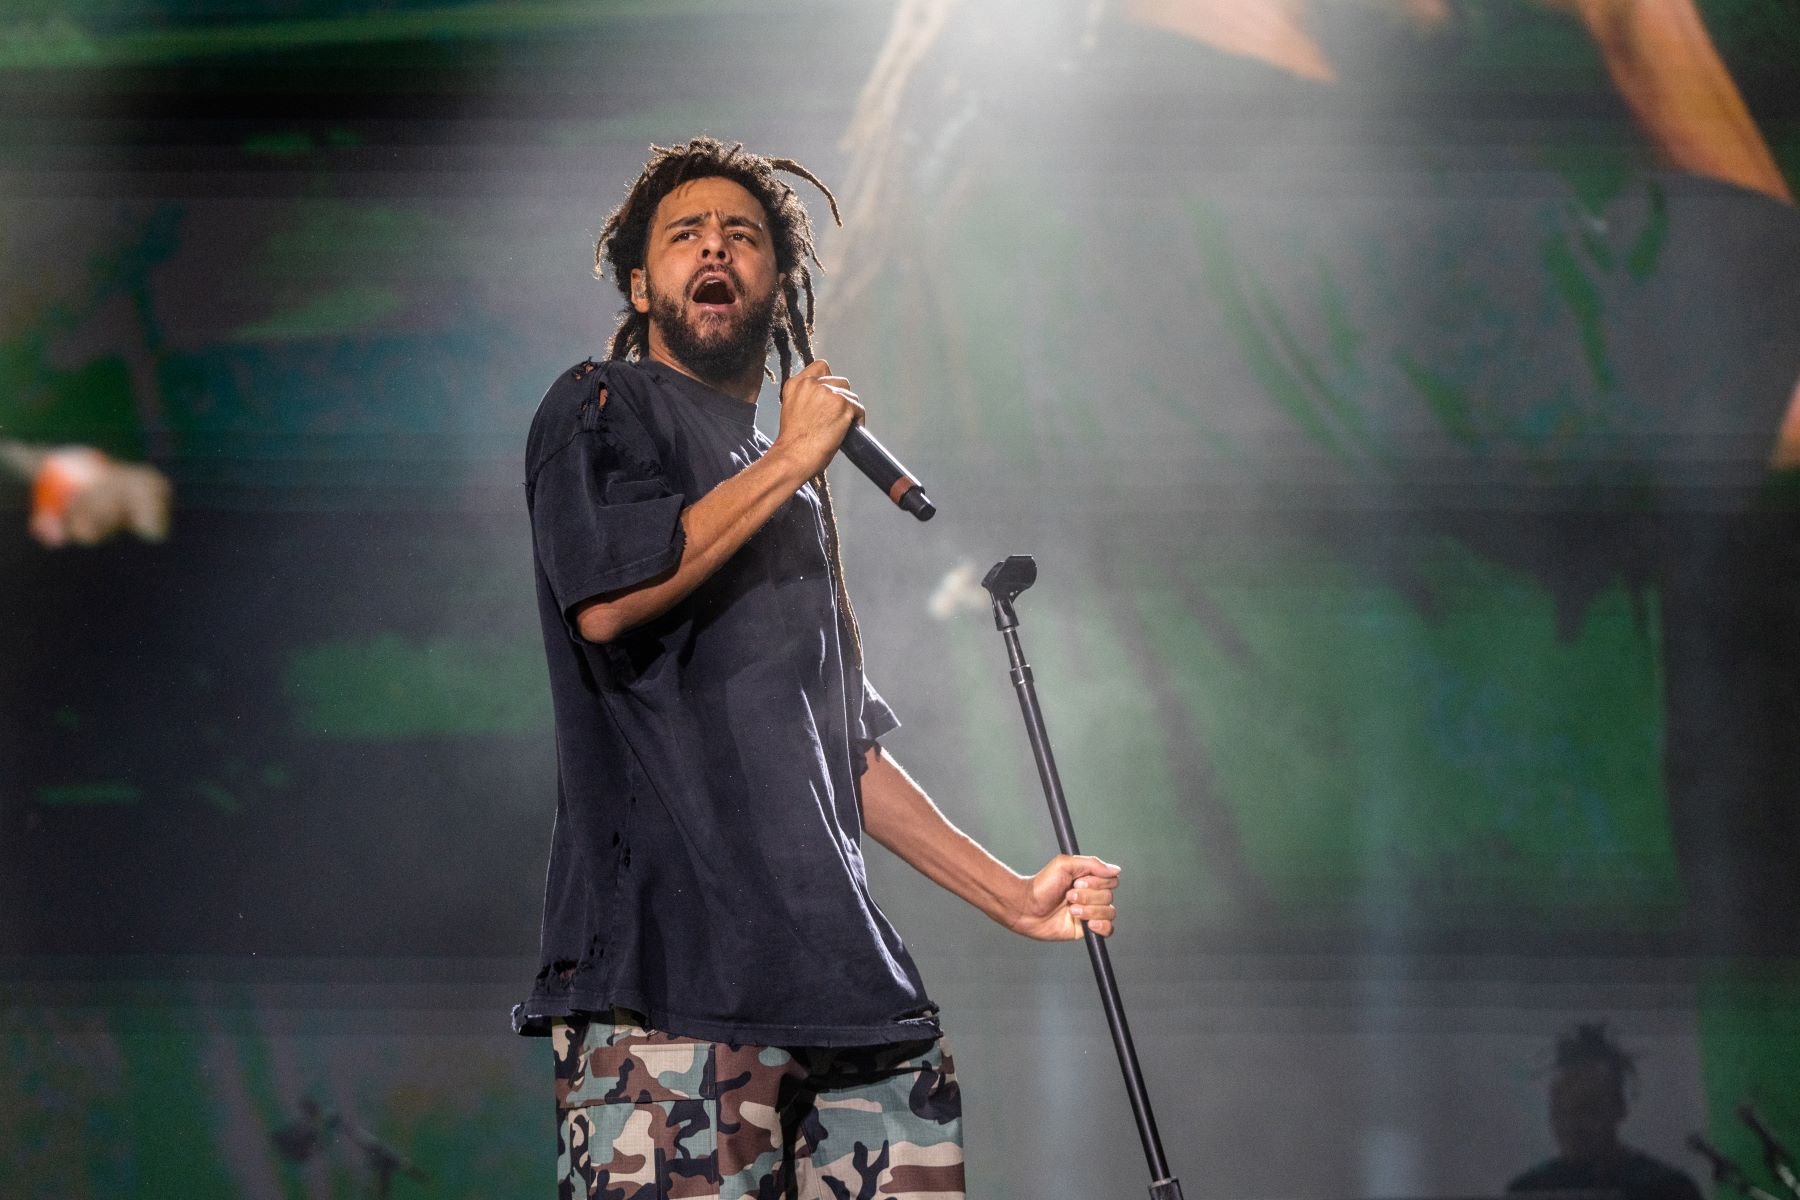 J. Cole performing during 2022 Lollapalooza at Grant Park in Chicago, Illinois